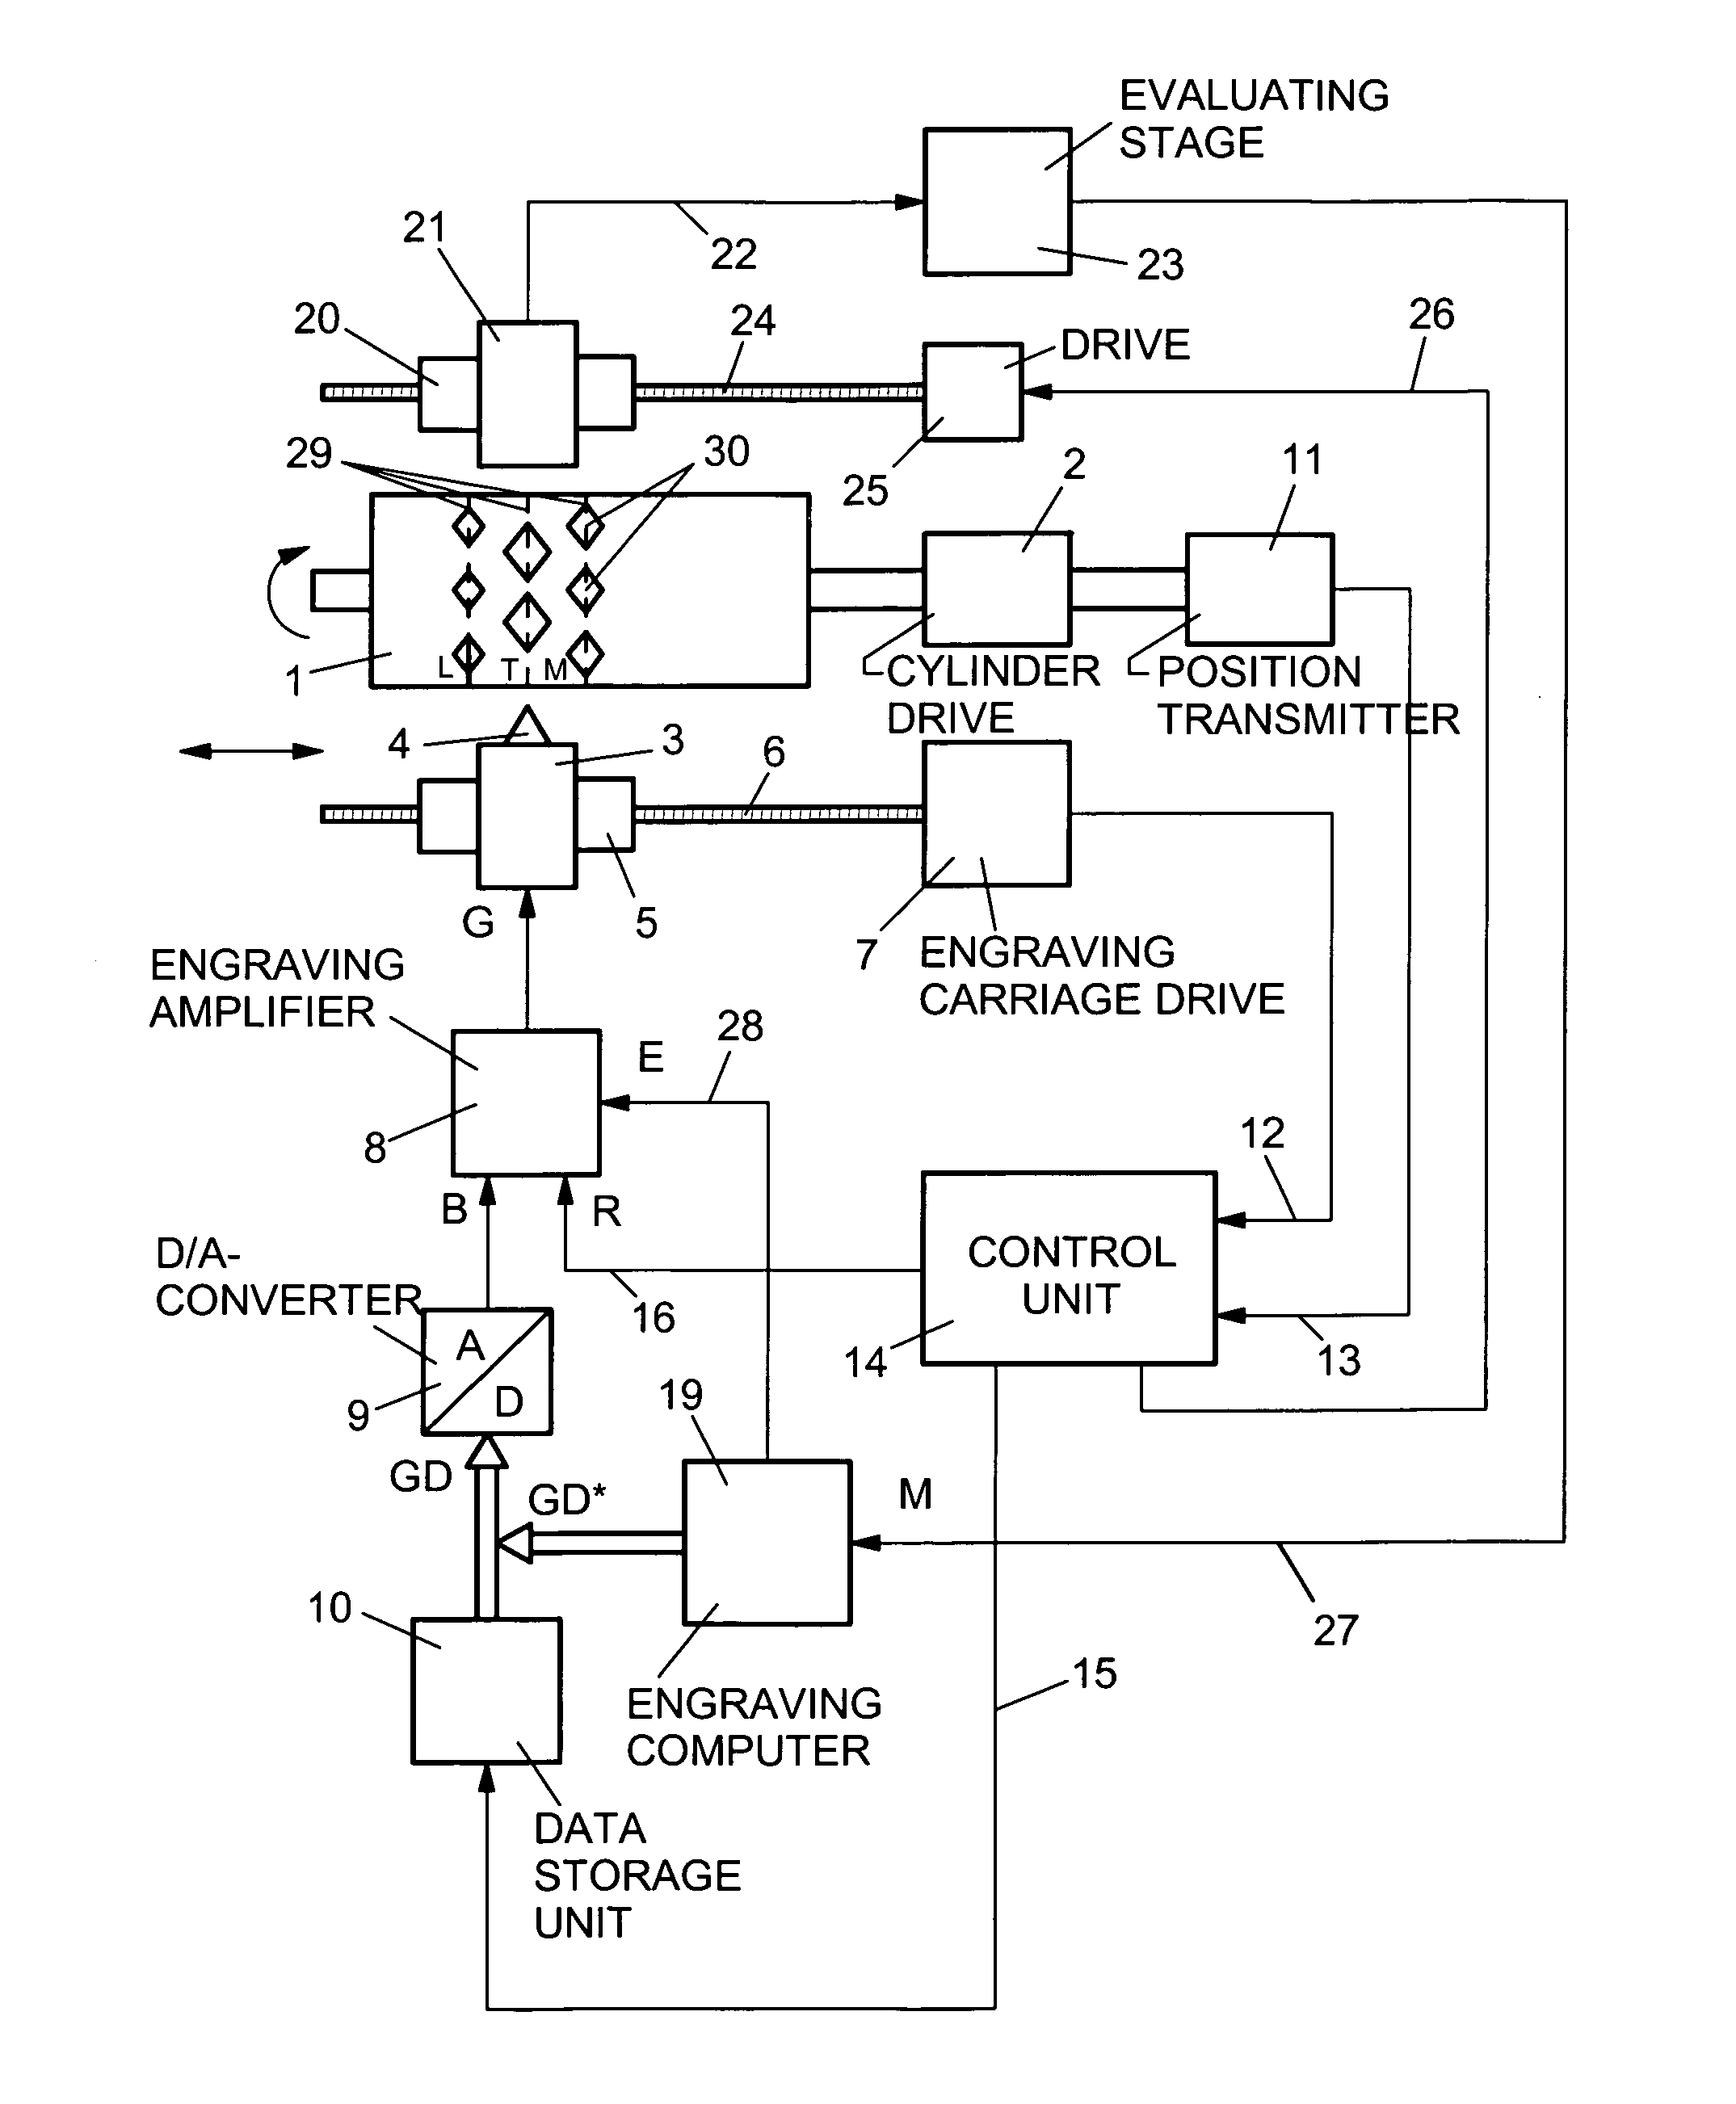 Method for calibrating an engraving amplifier